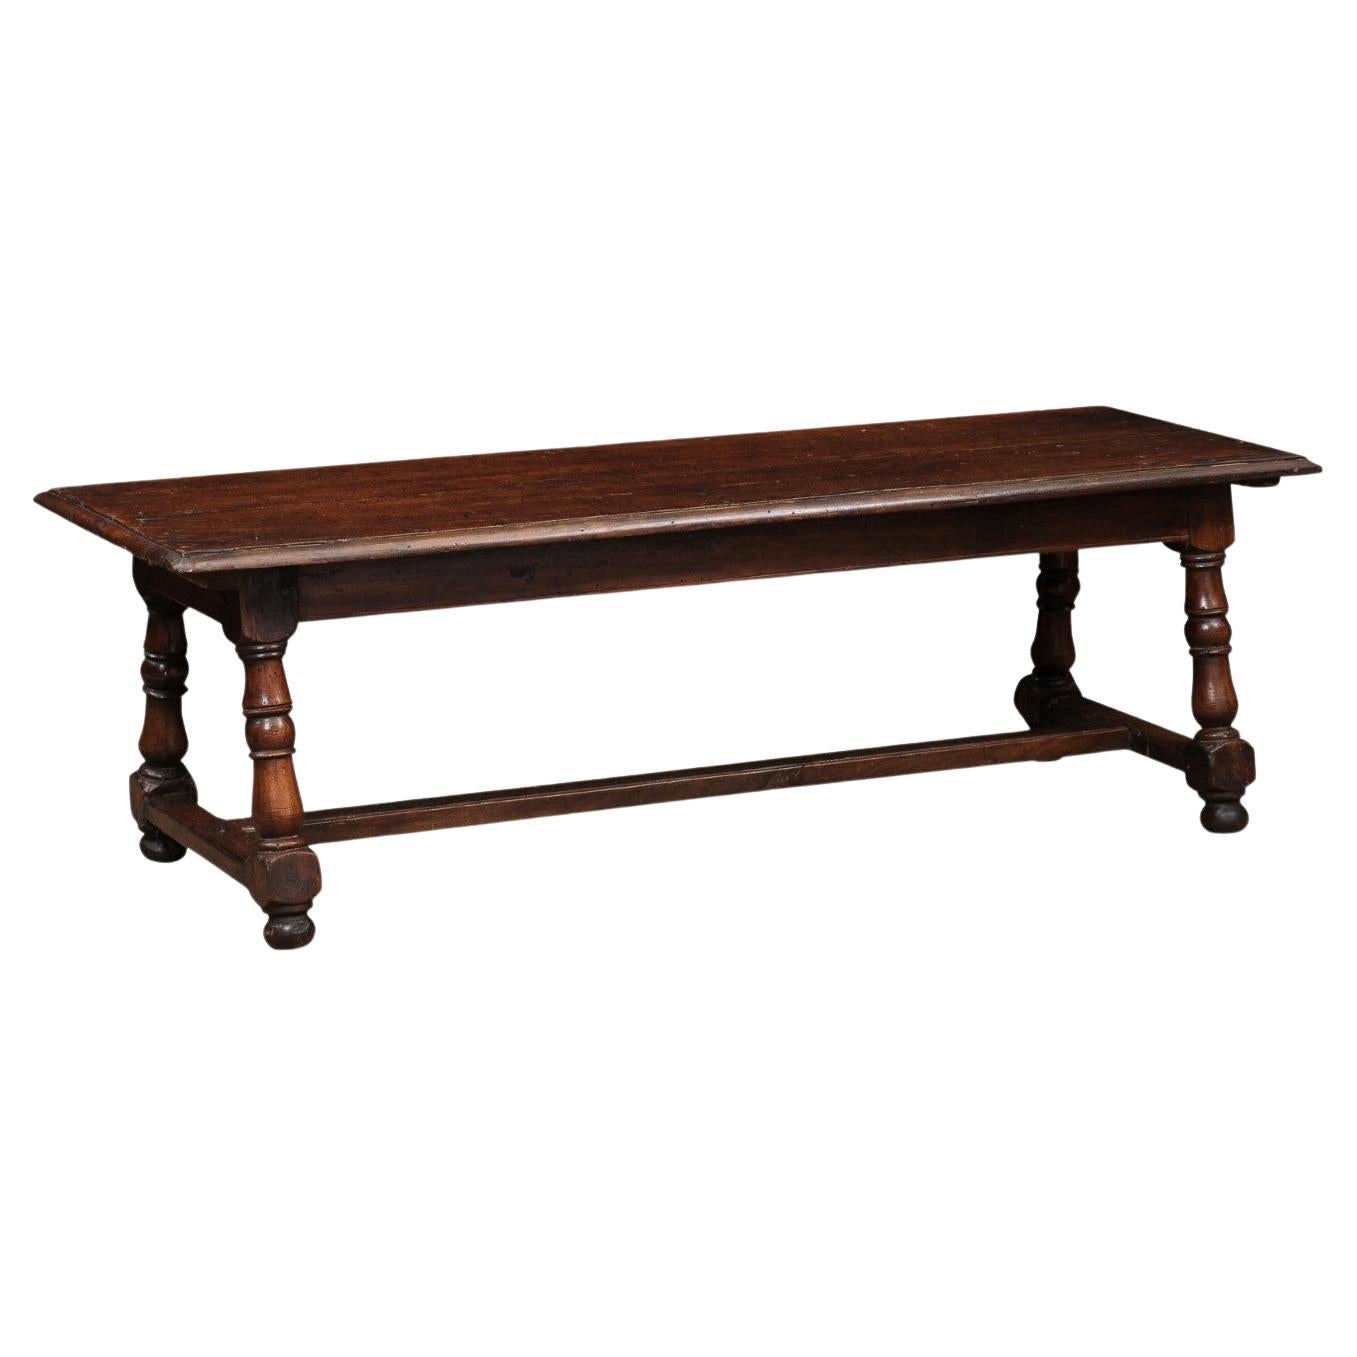  French Walnut Bench / Coffee Table with Turned Legs & H Form Stretcher